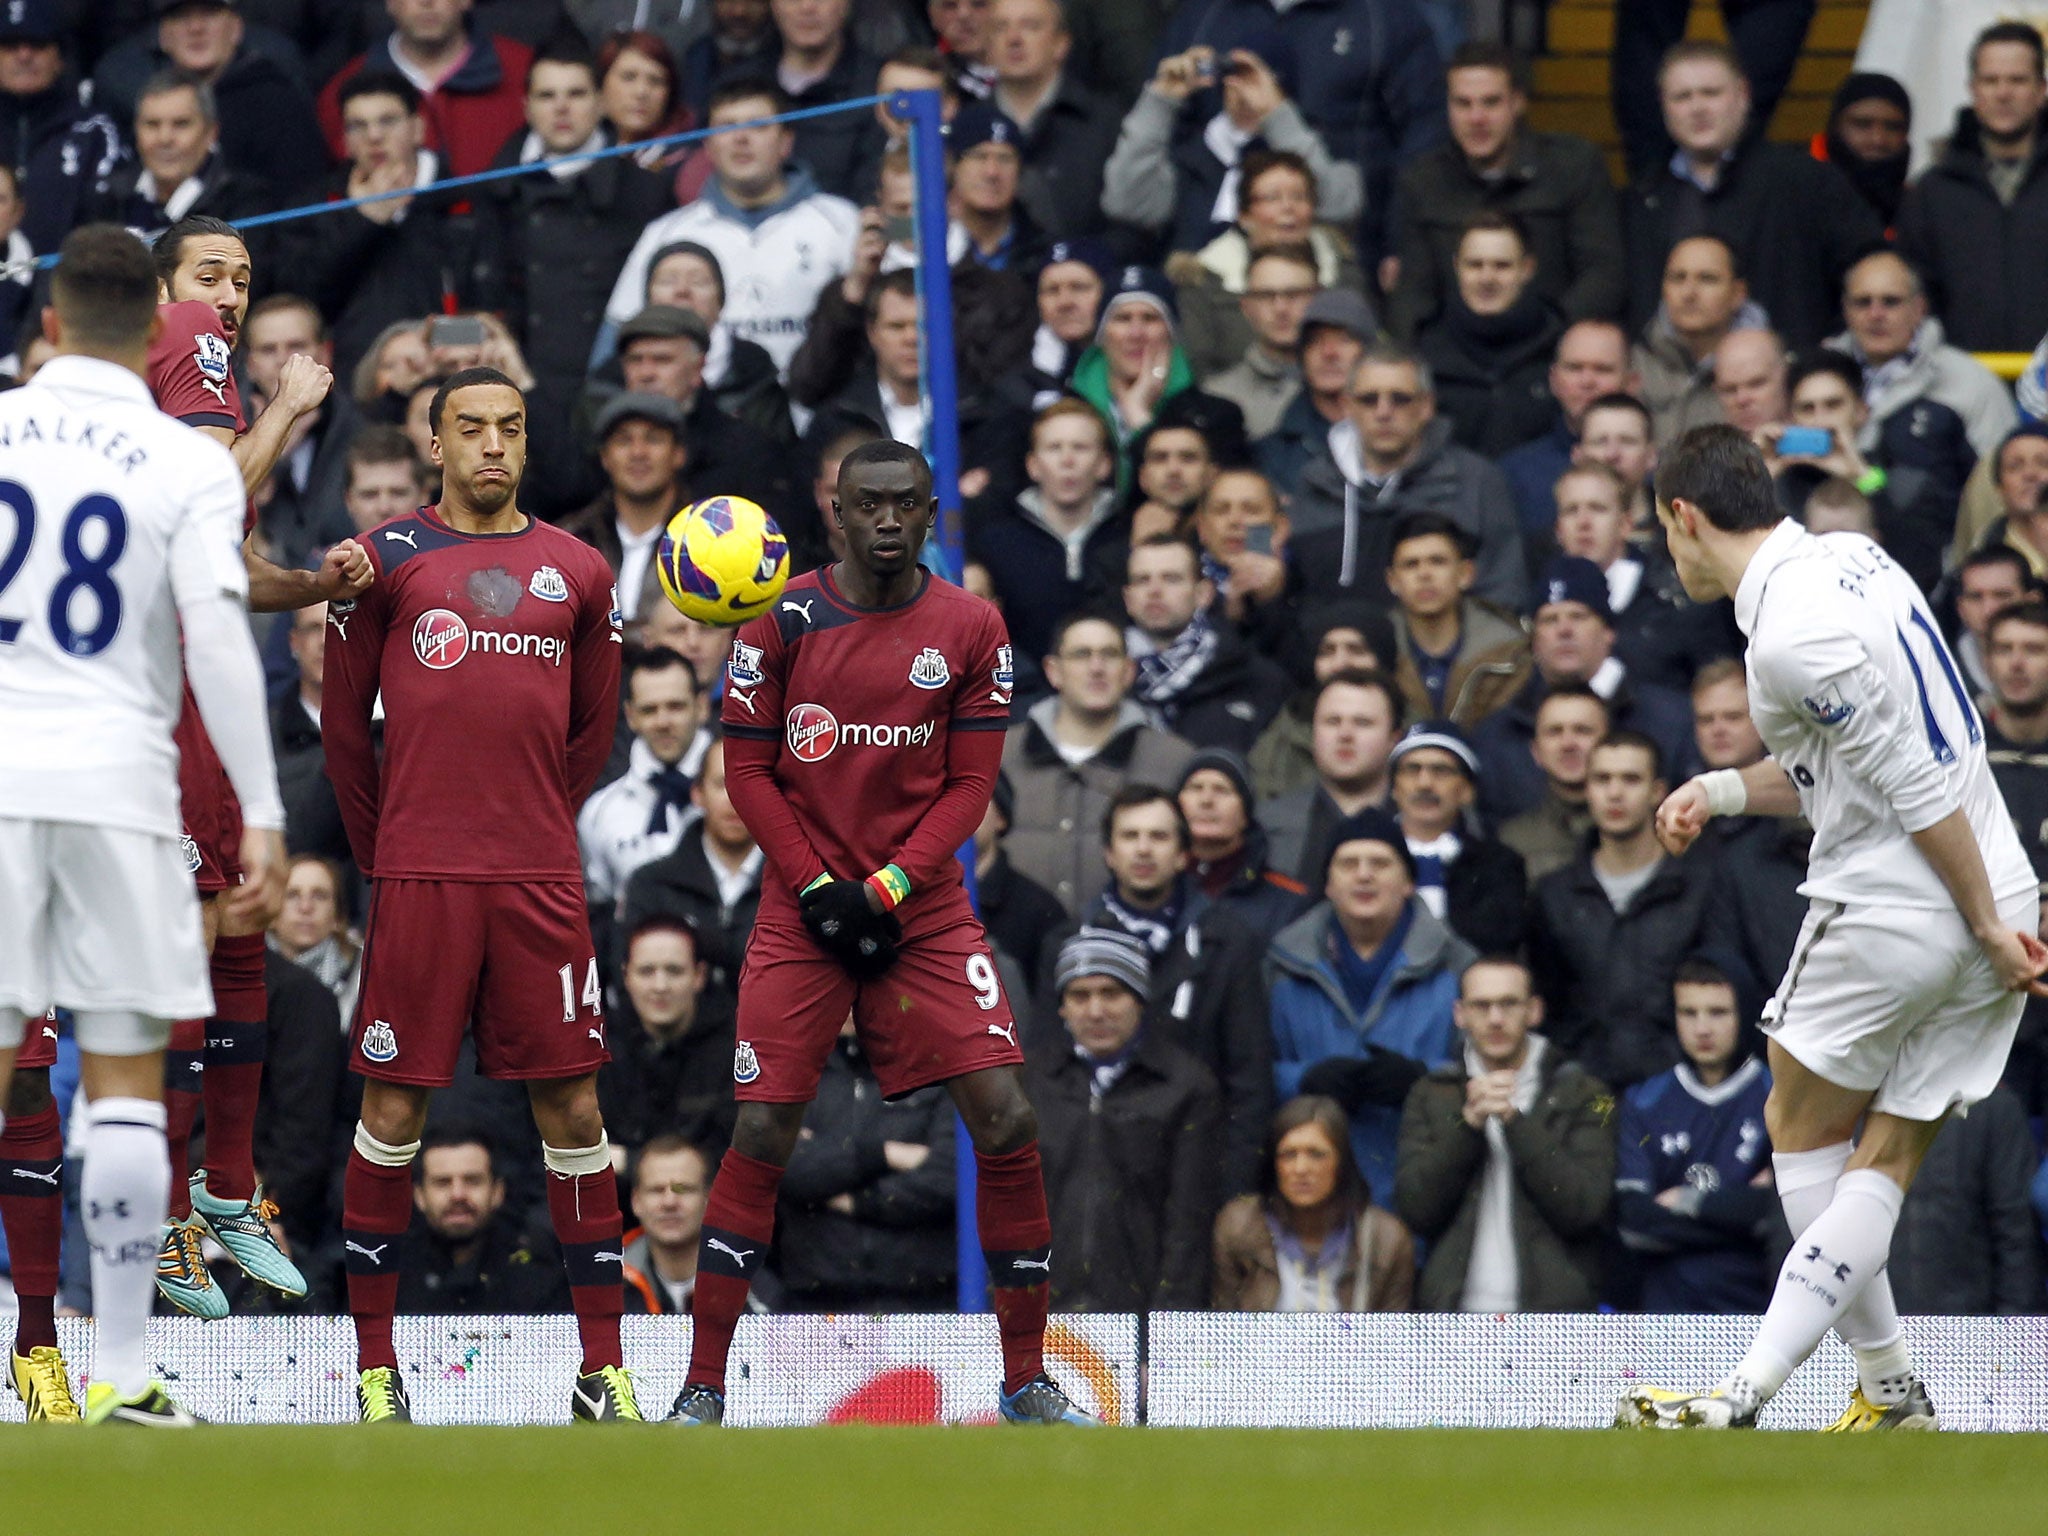 Gareth Bale scores his opening goal from a freekick